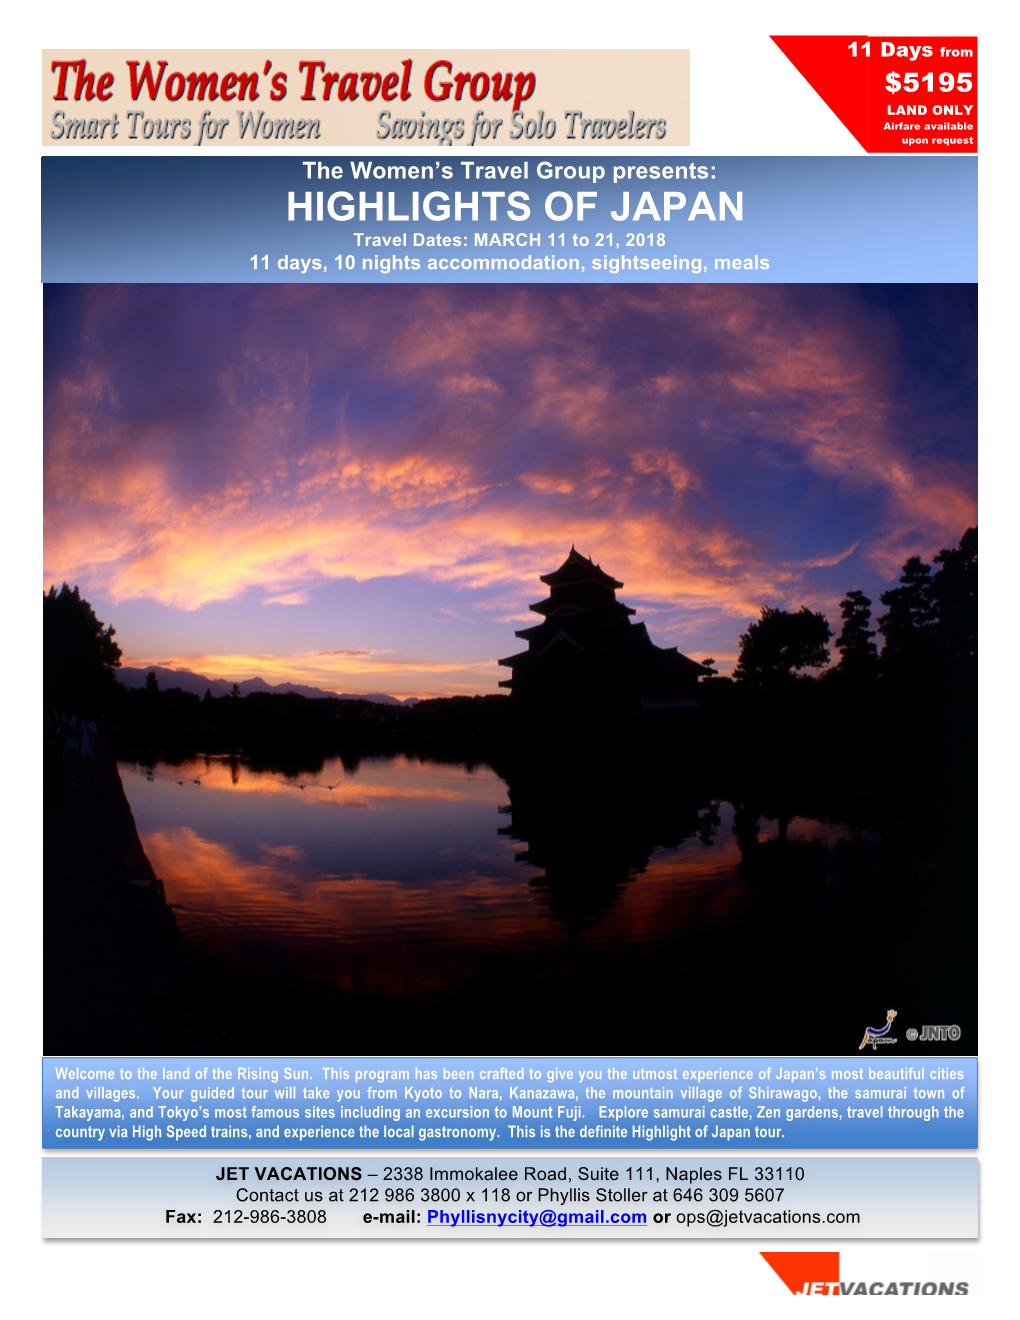 HIGHLIGHTS of JAPAN Travel Dates: MARCH 11 to 21, 2018 11 Days, 10 Nights Accommodation, Sightseeing, Meals